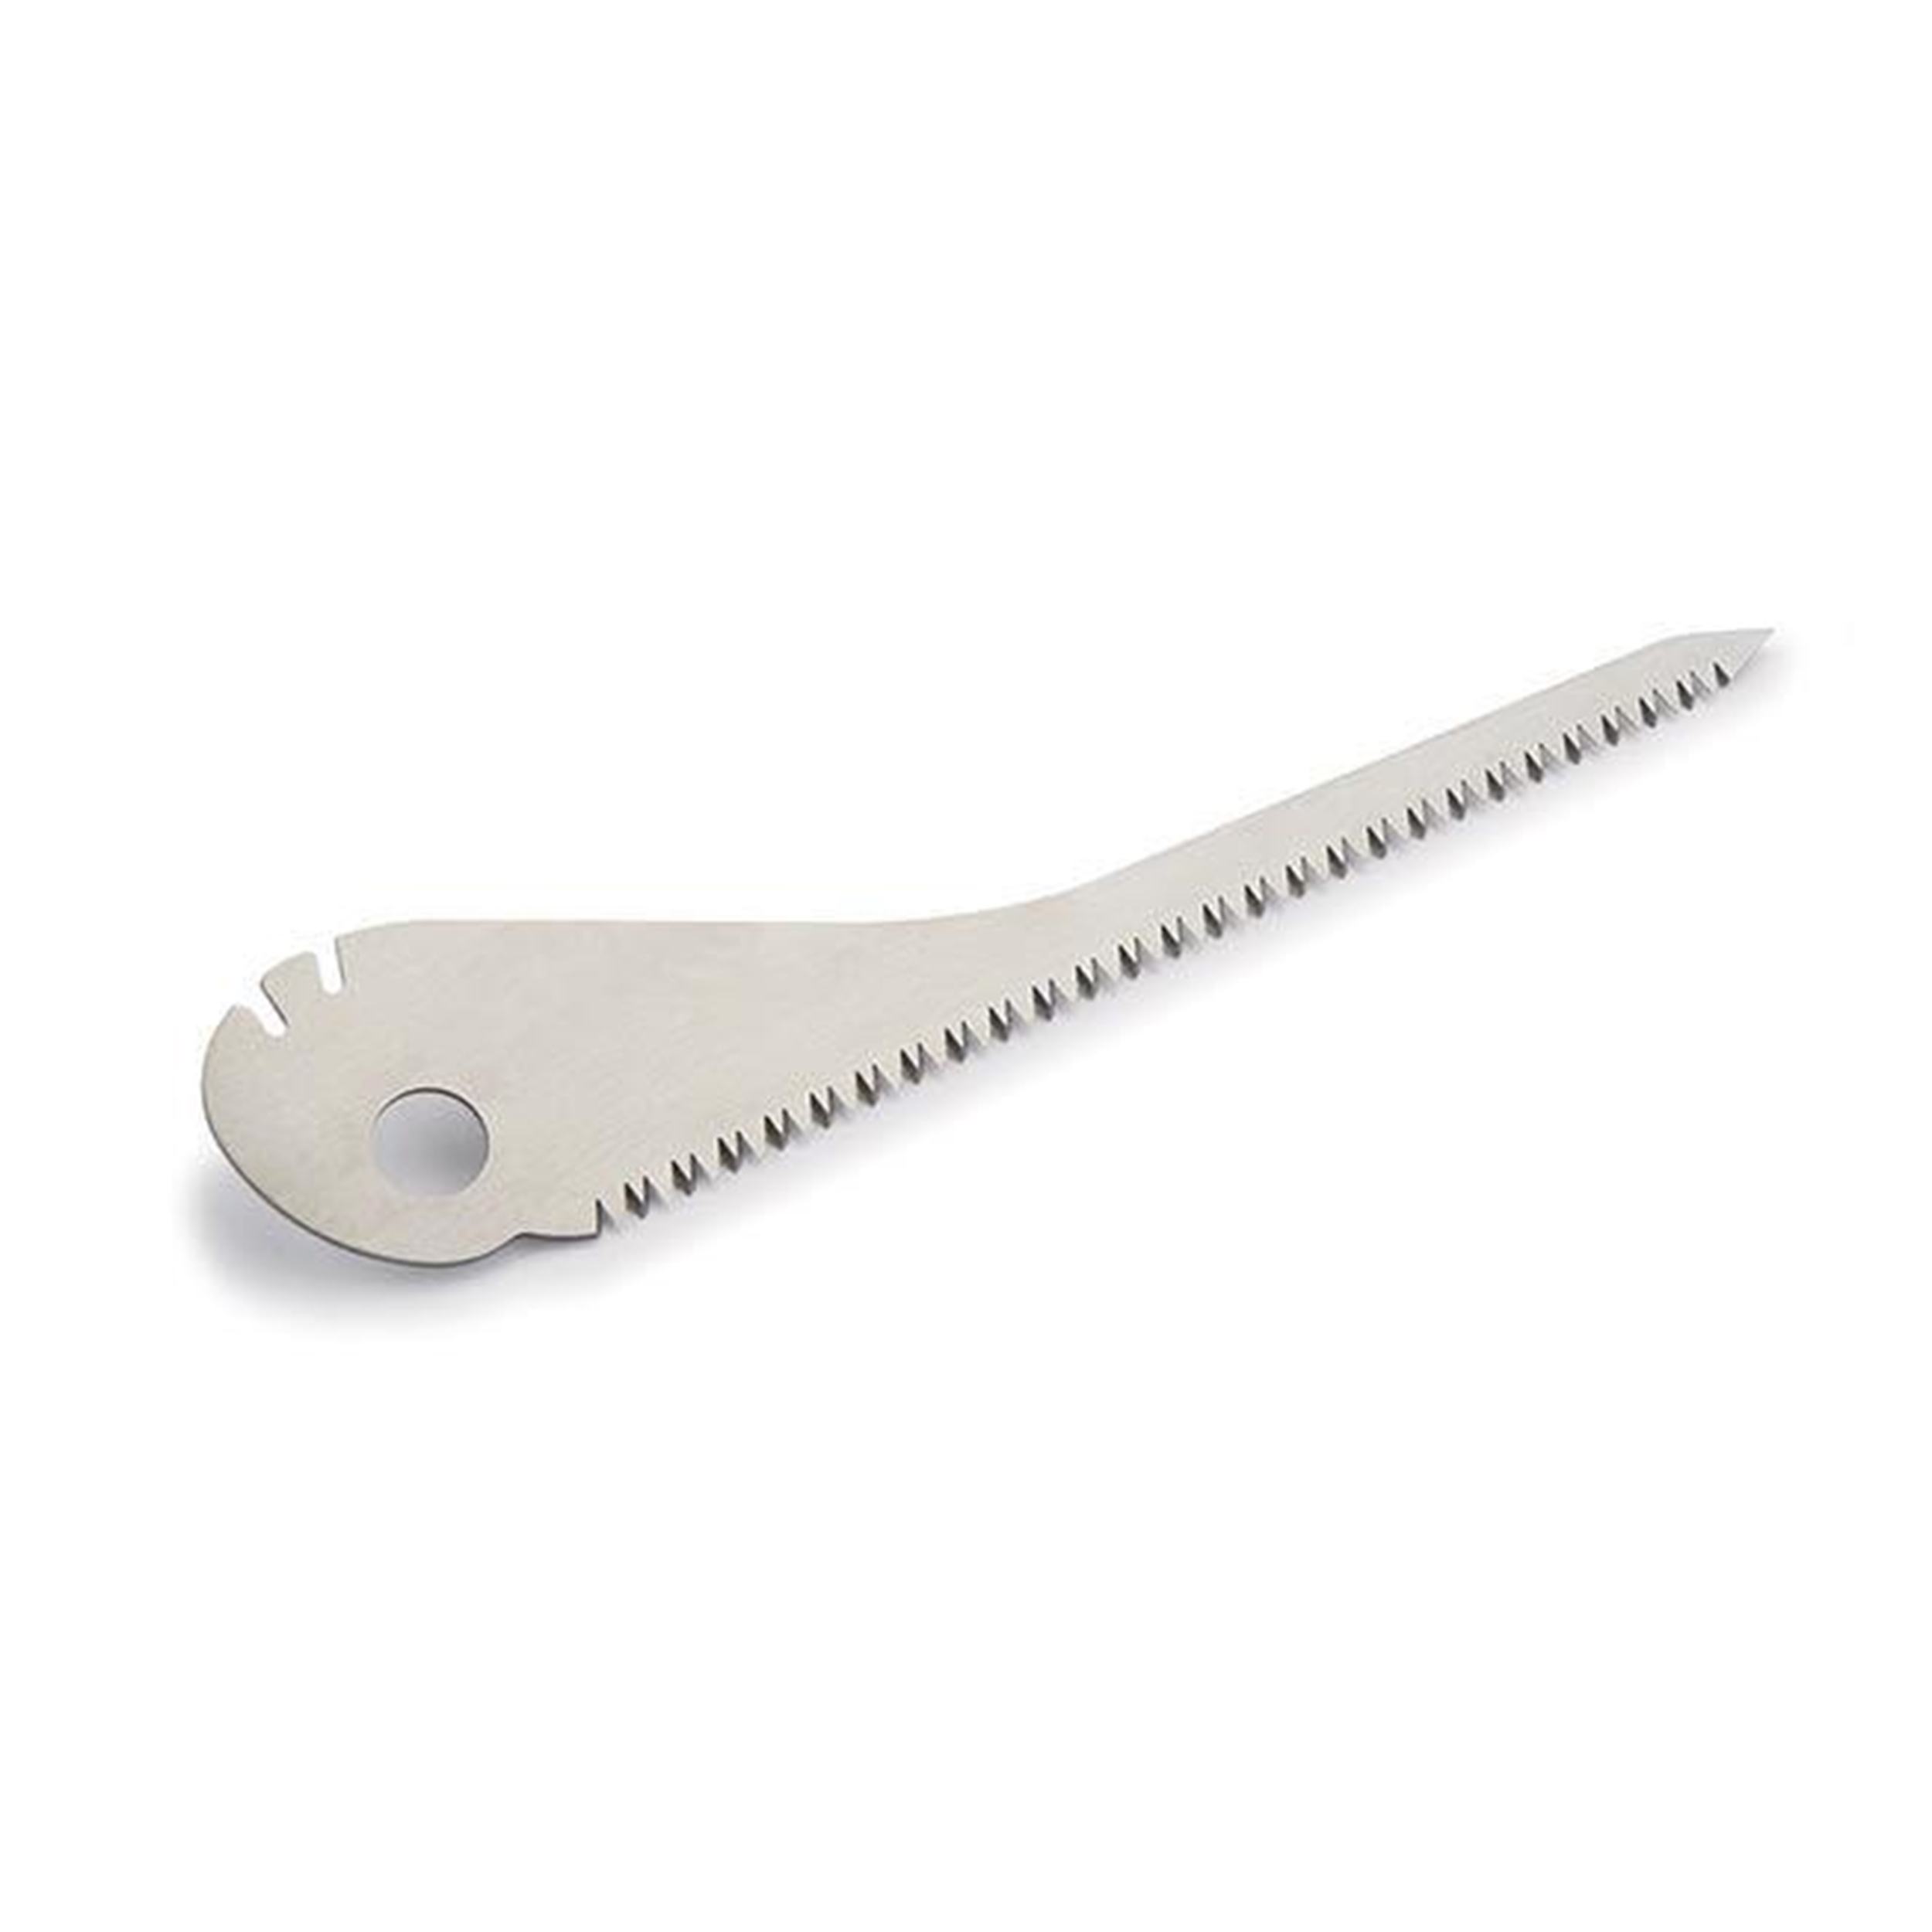 Folding Blade Woodworking Saw No. 0531 Replacement Blade